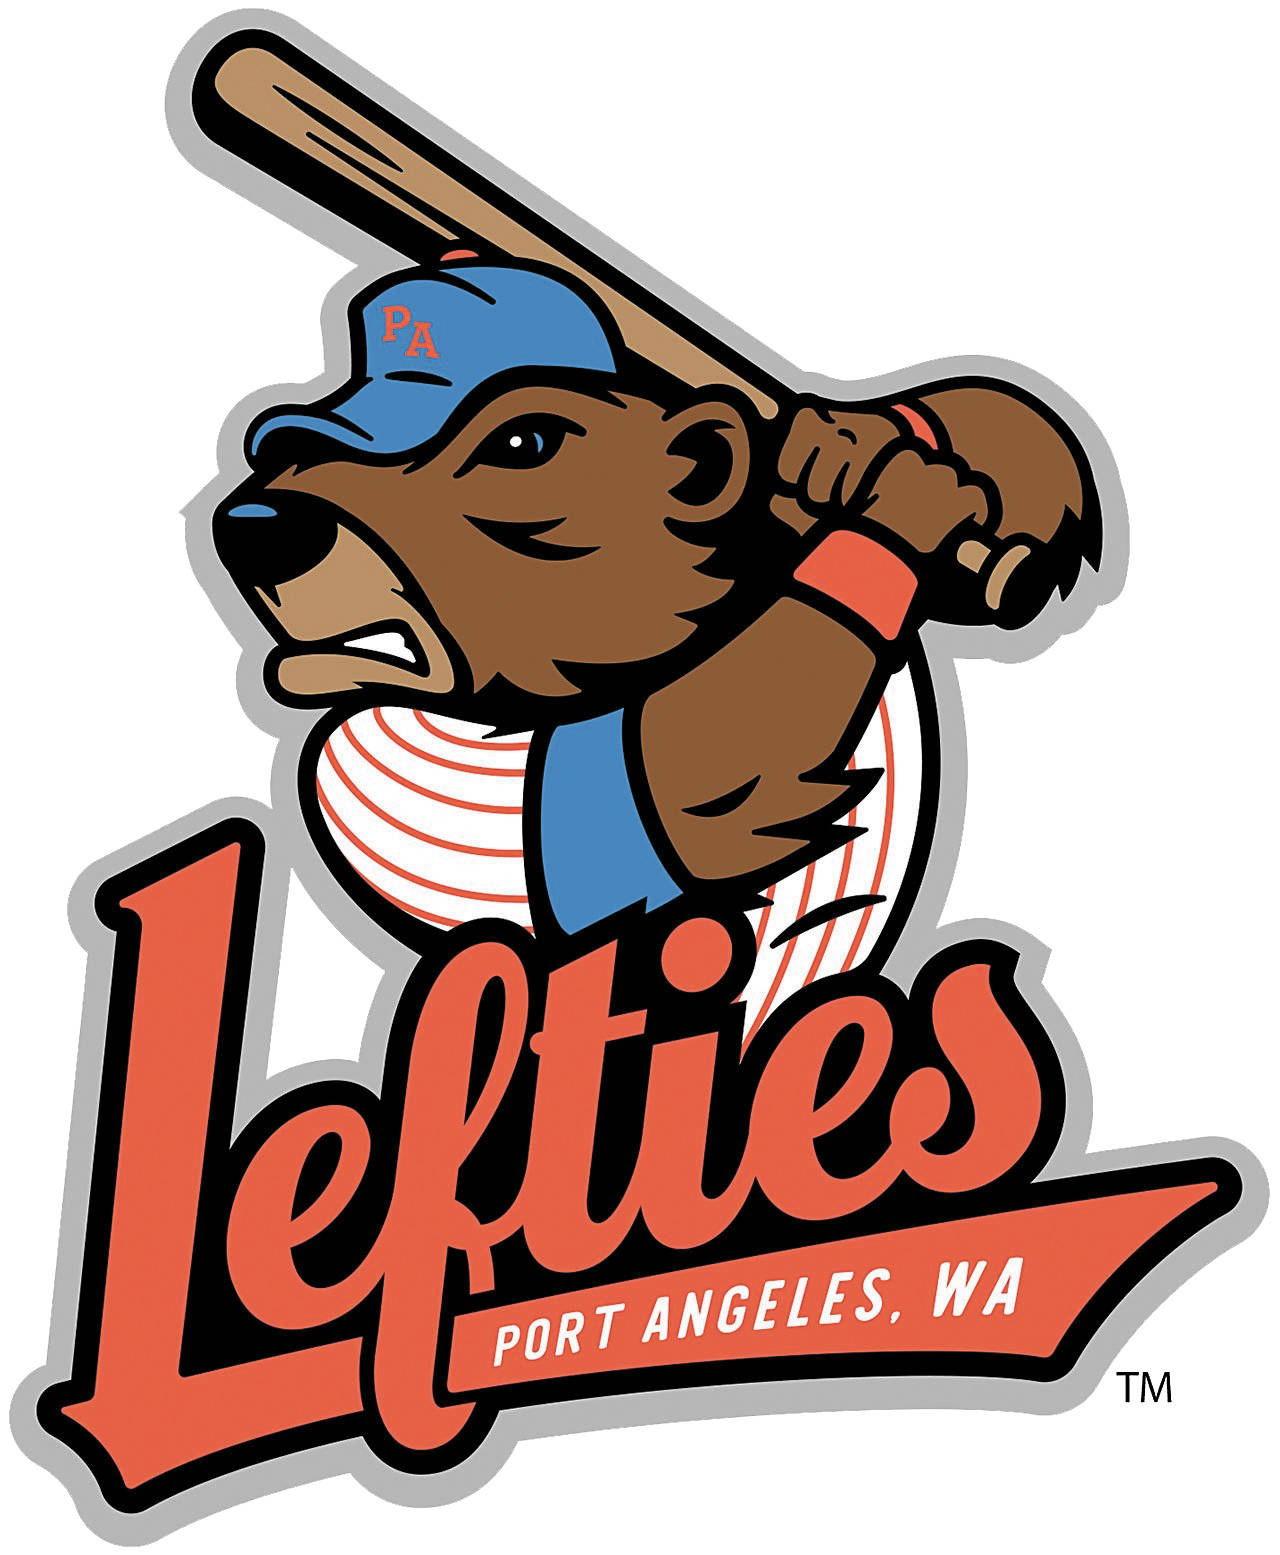 LEFTIES: Offense limited in loss